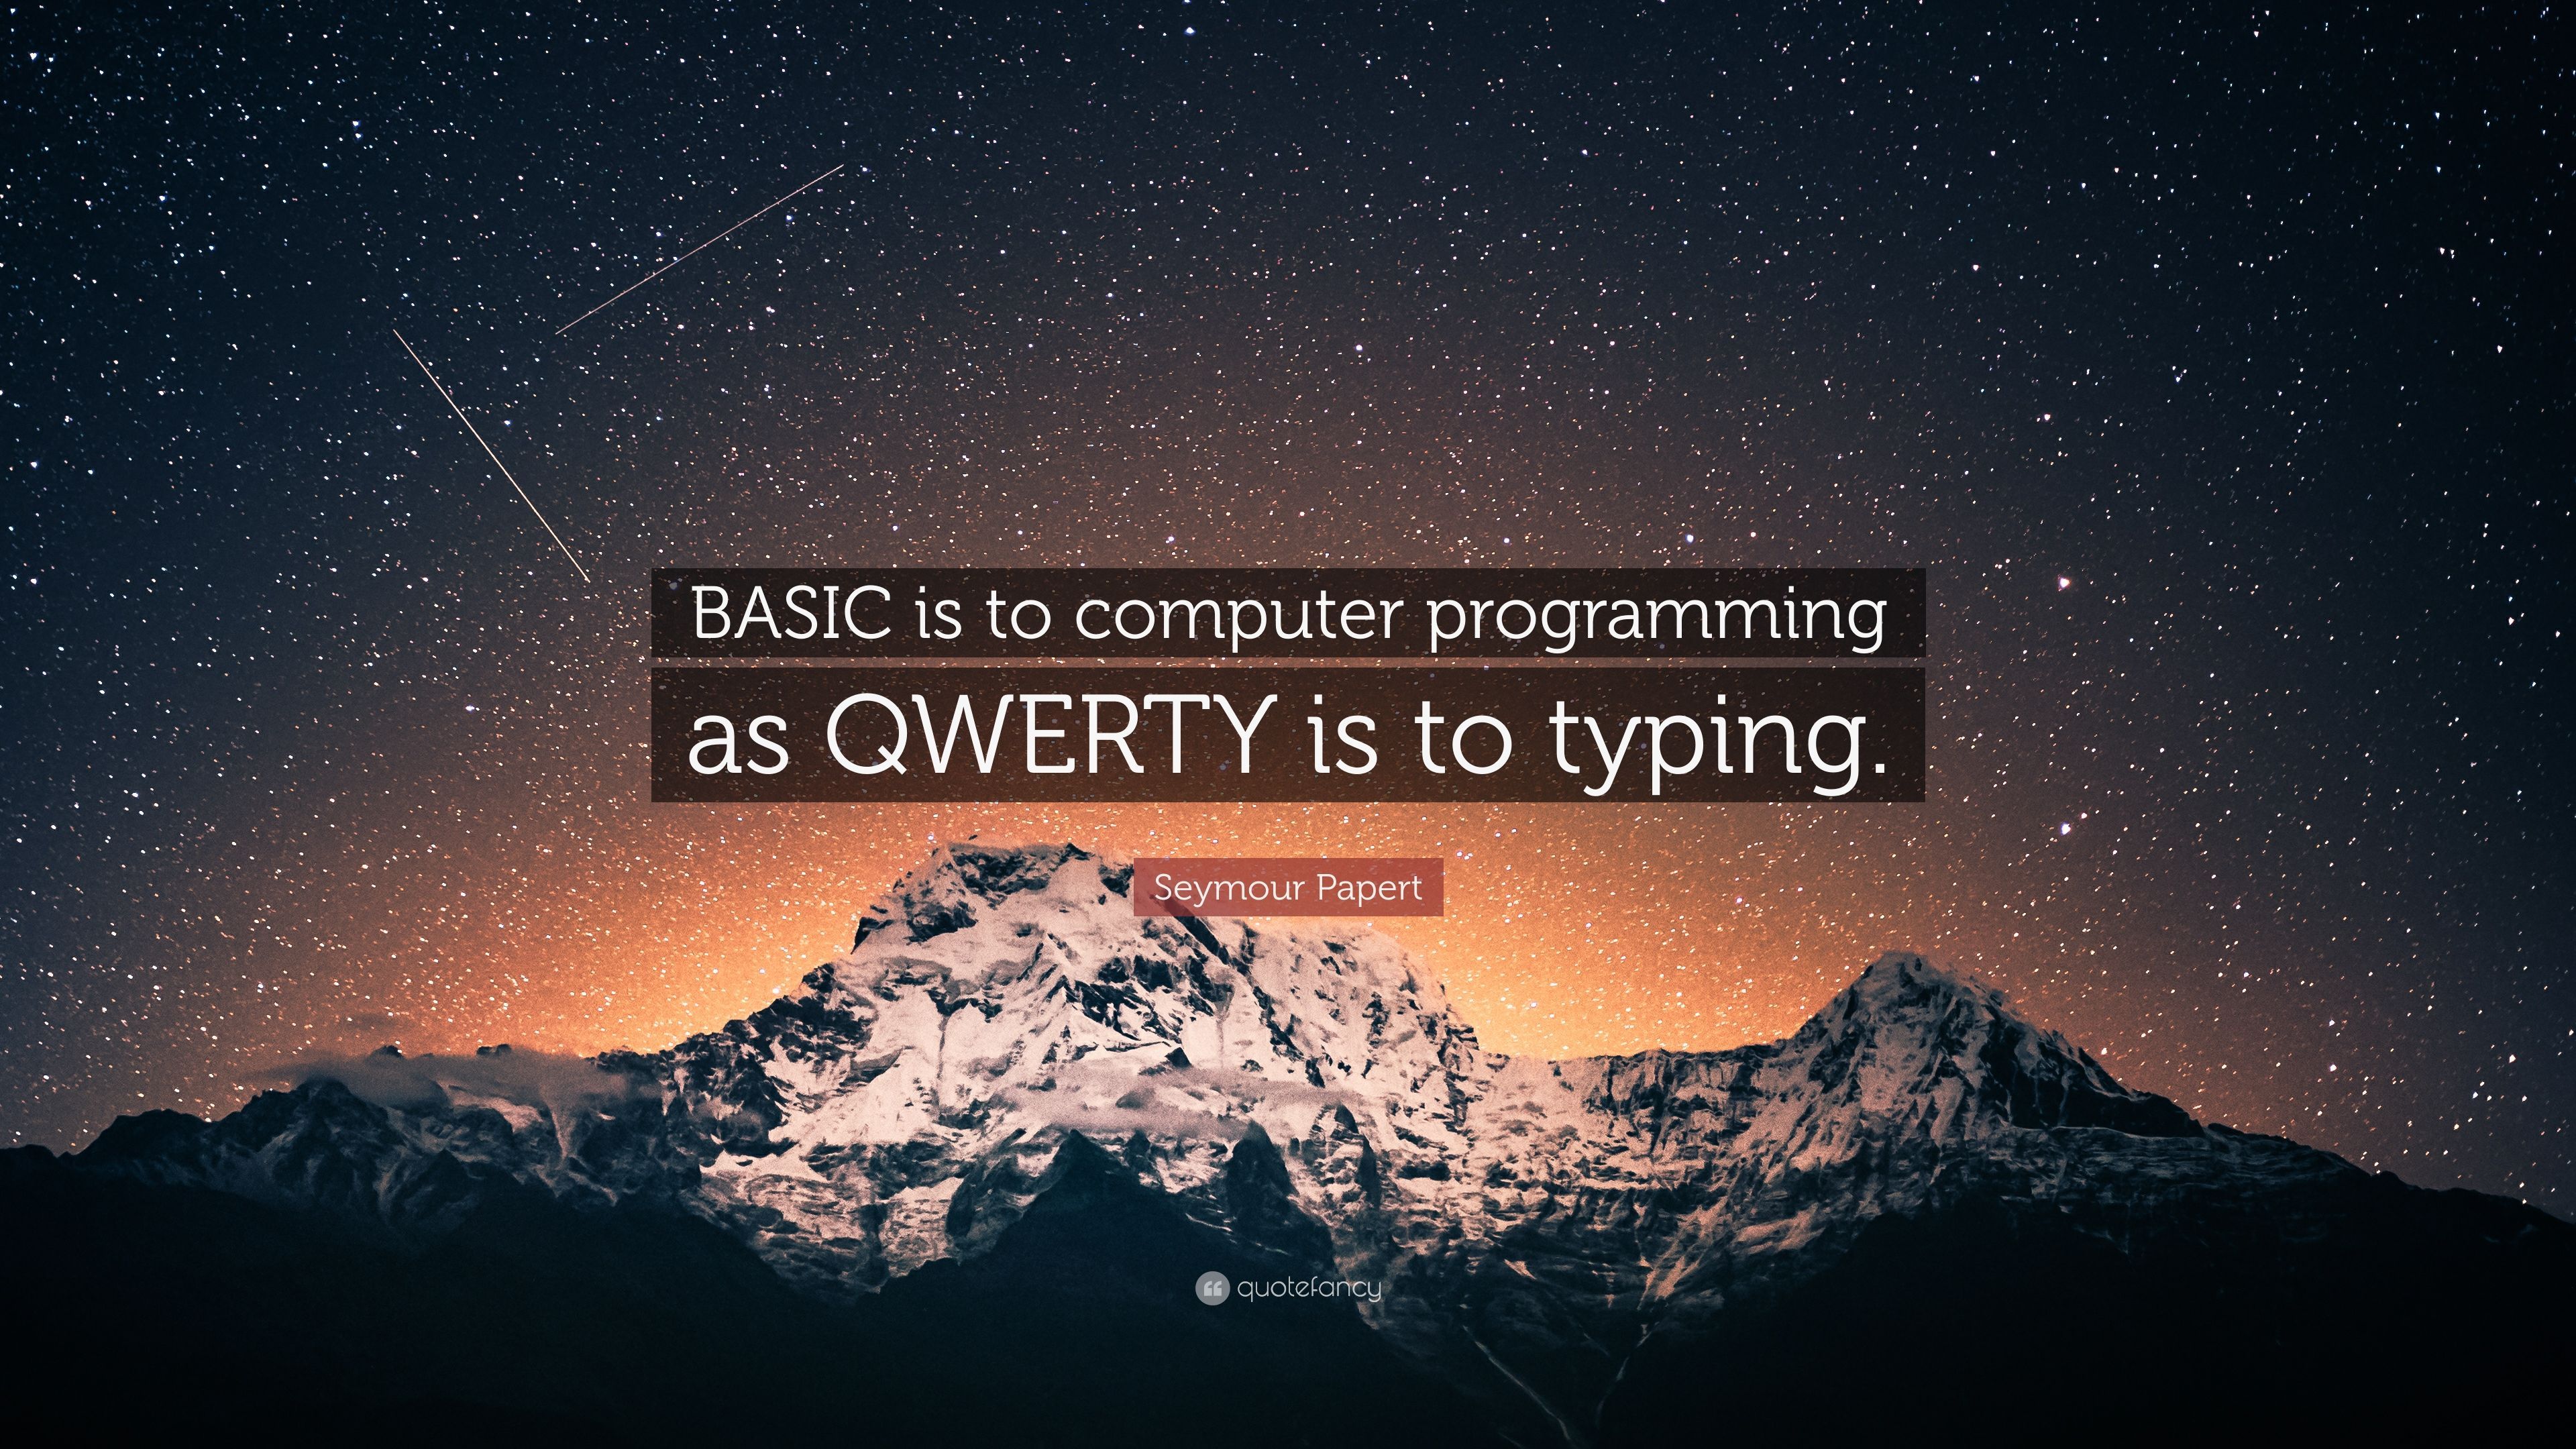 Seymour Papert Quote: “BASIC is to computer programming as QWERTY